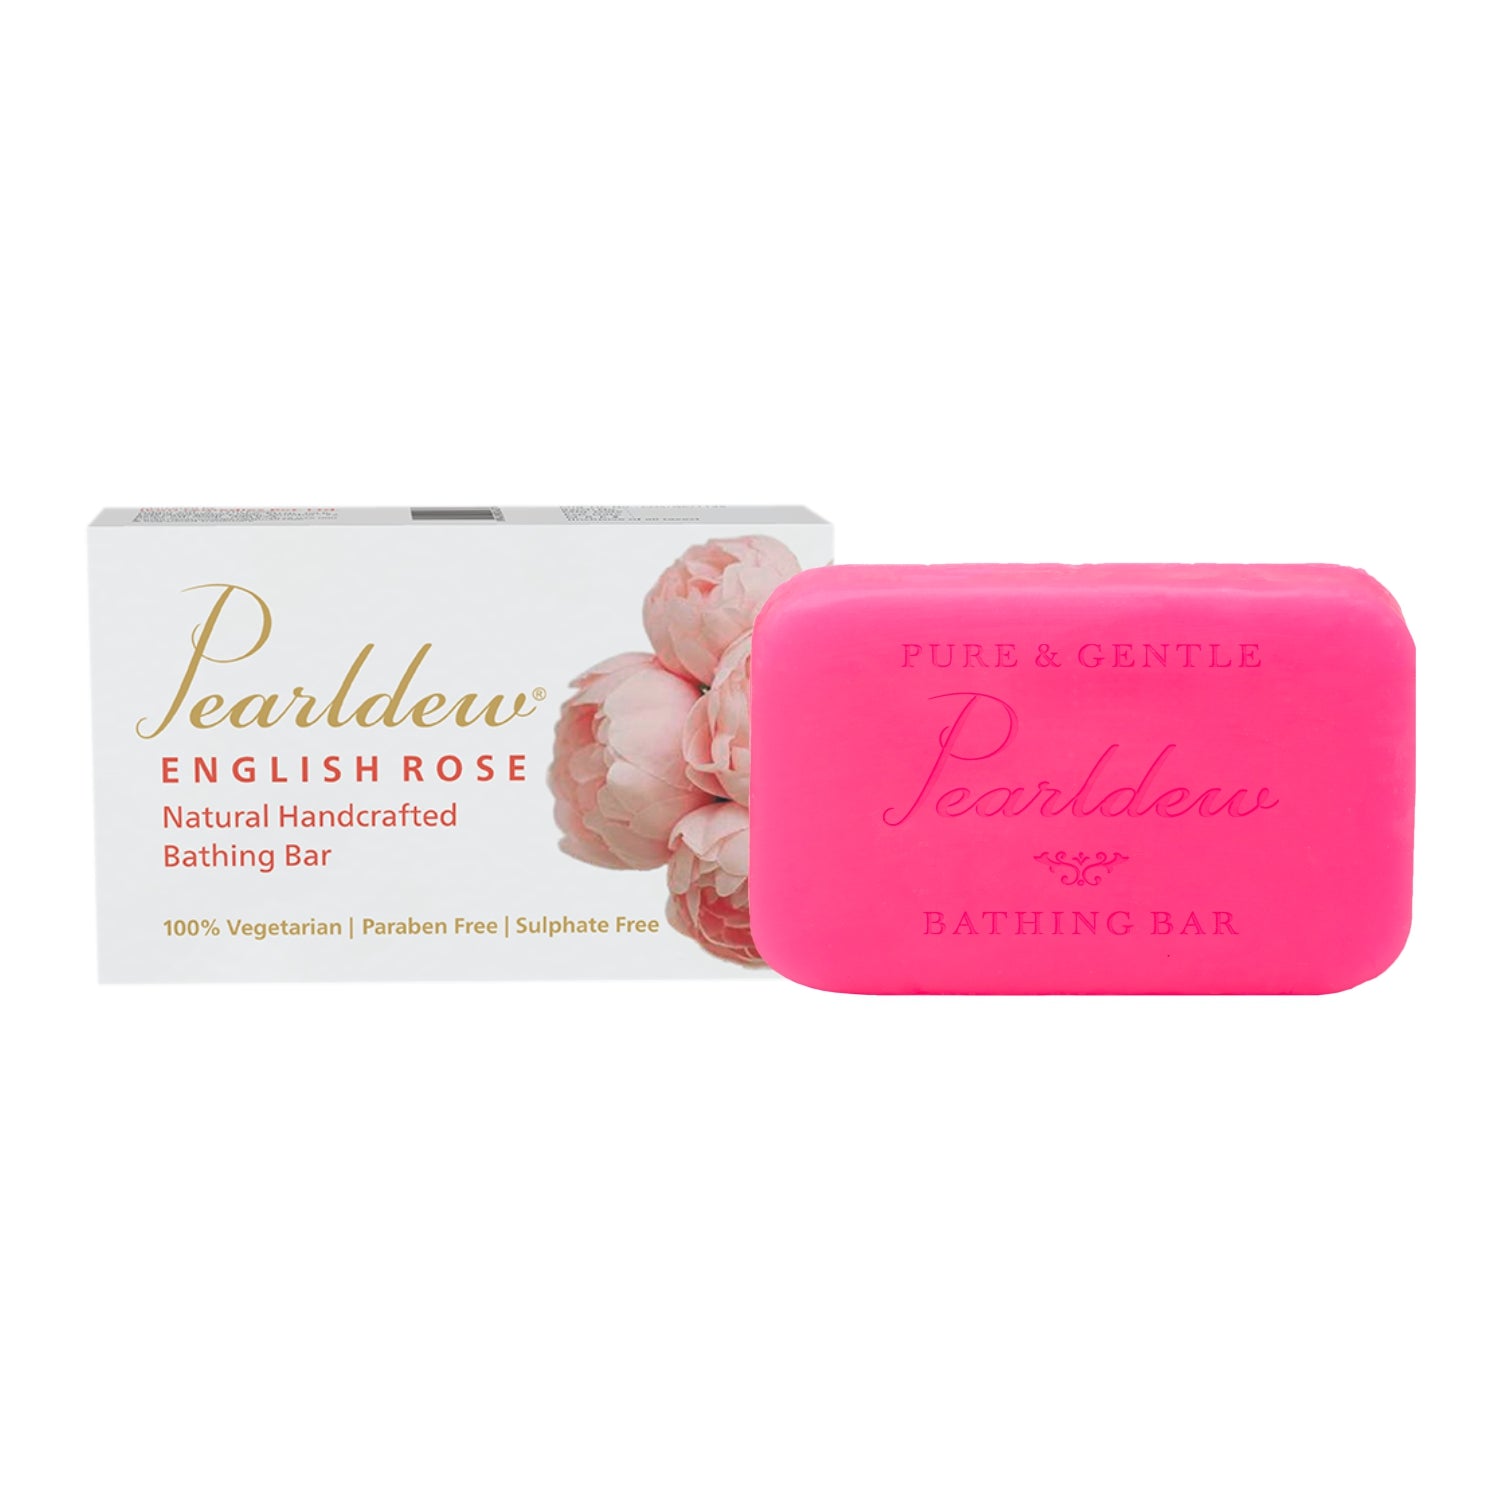 Pearldew English Rose Natural Handcrafted Bathing Bar (75 gm)